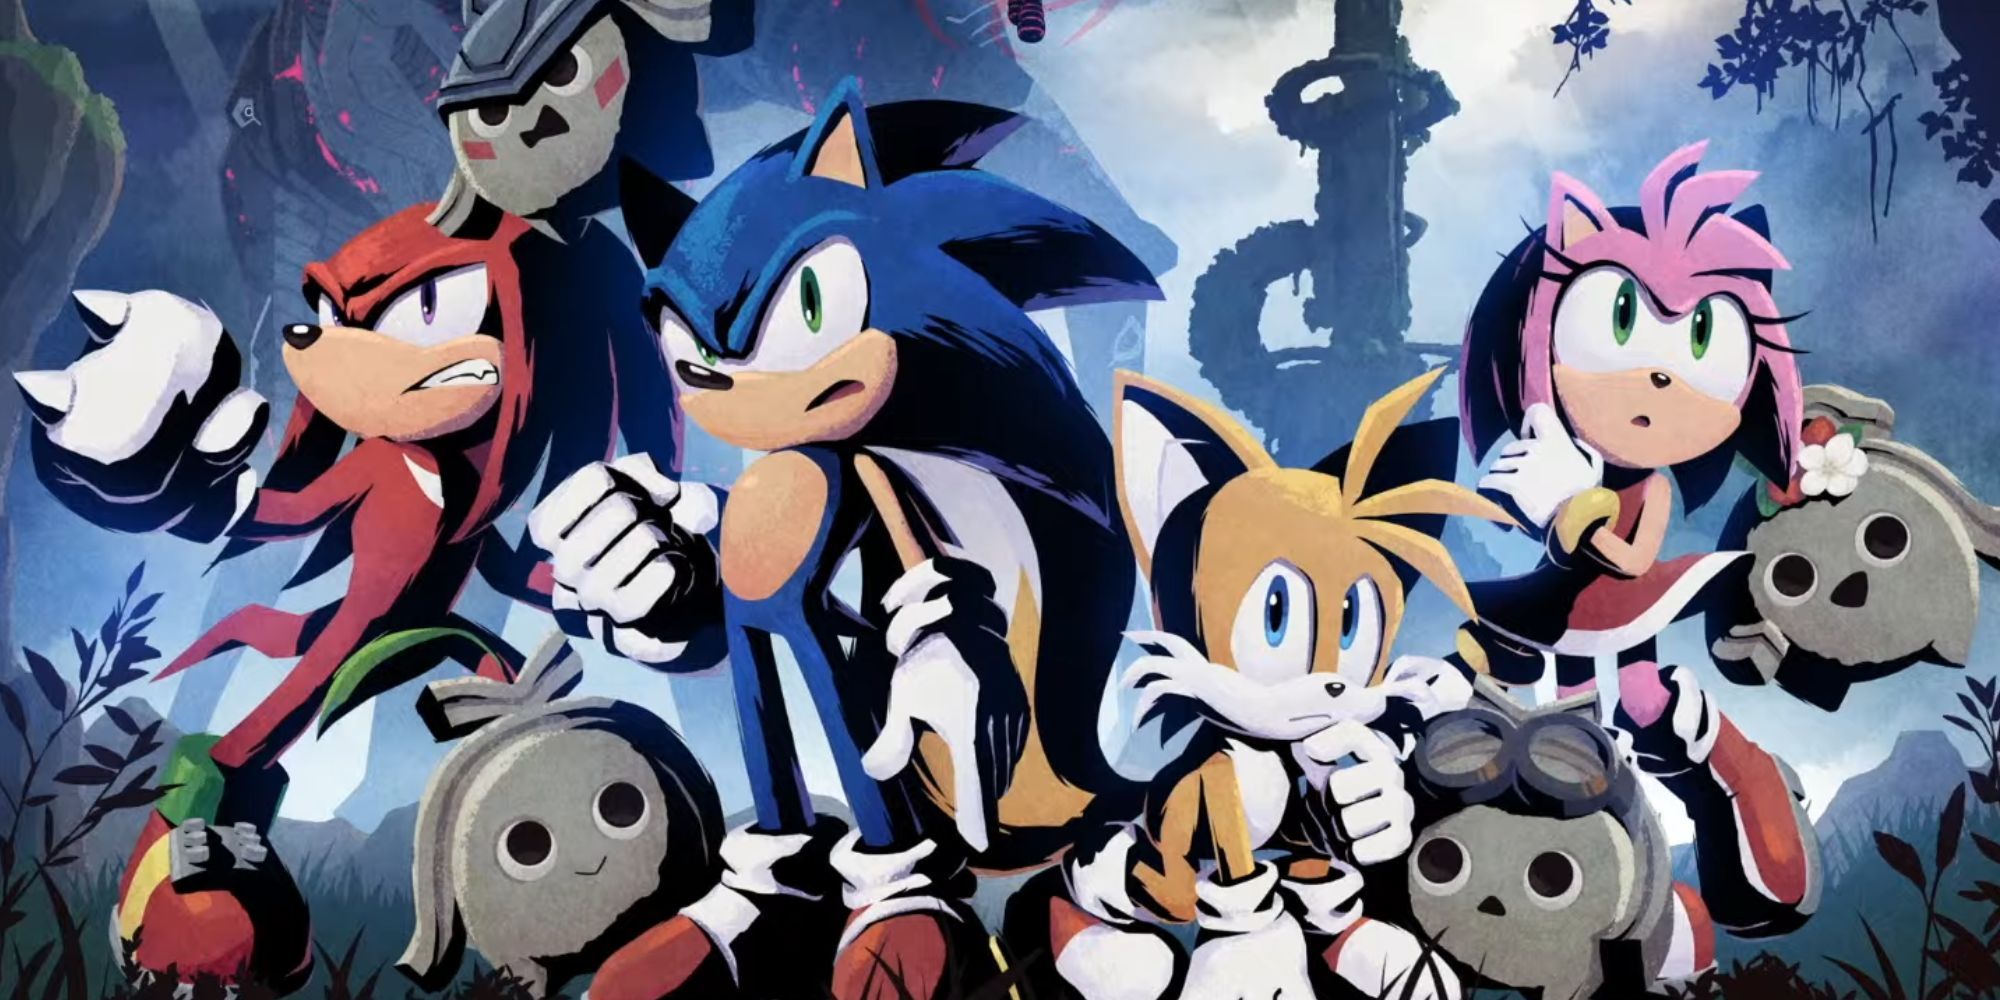 Sonic Frontiers Already Set Up Its DLC Characters